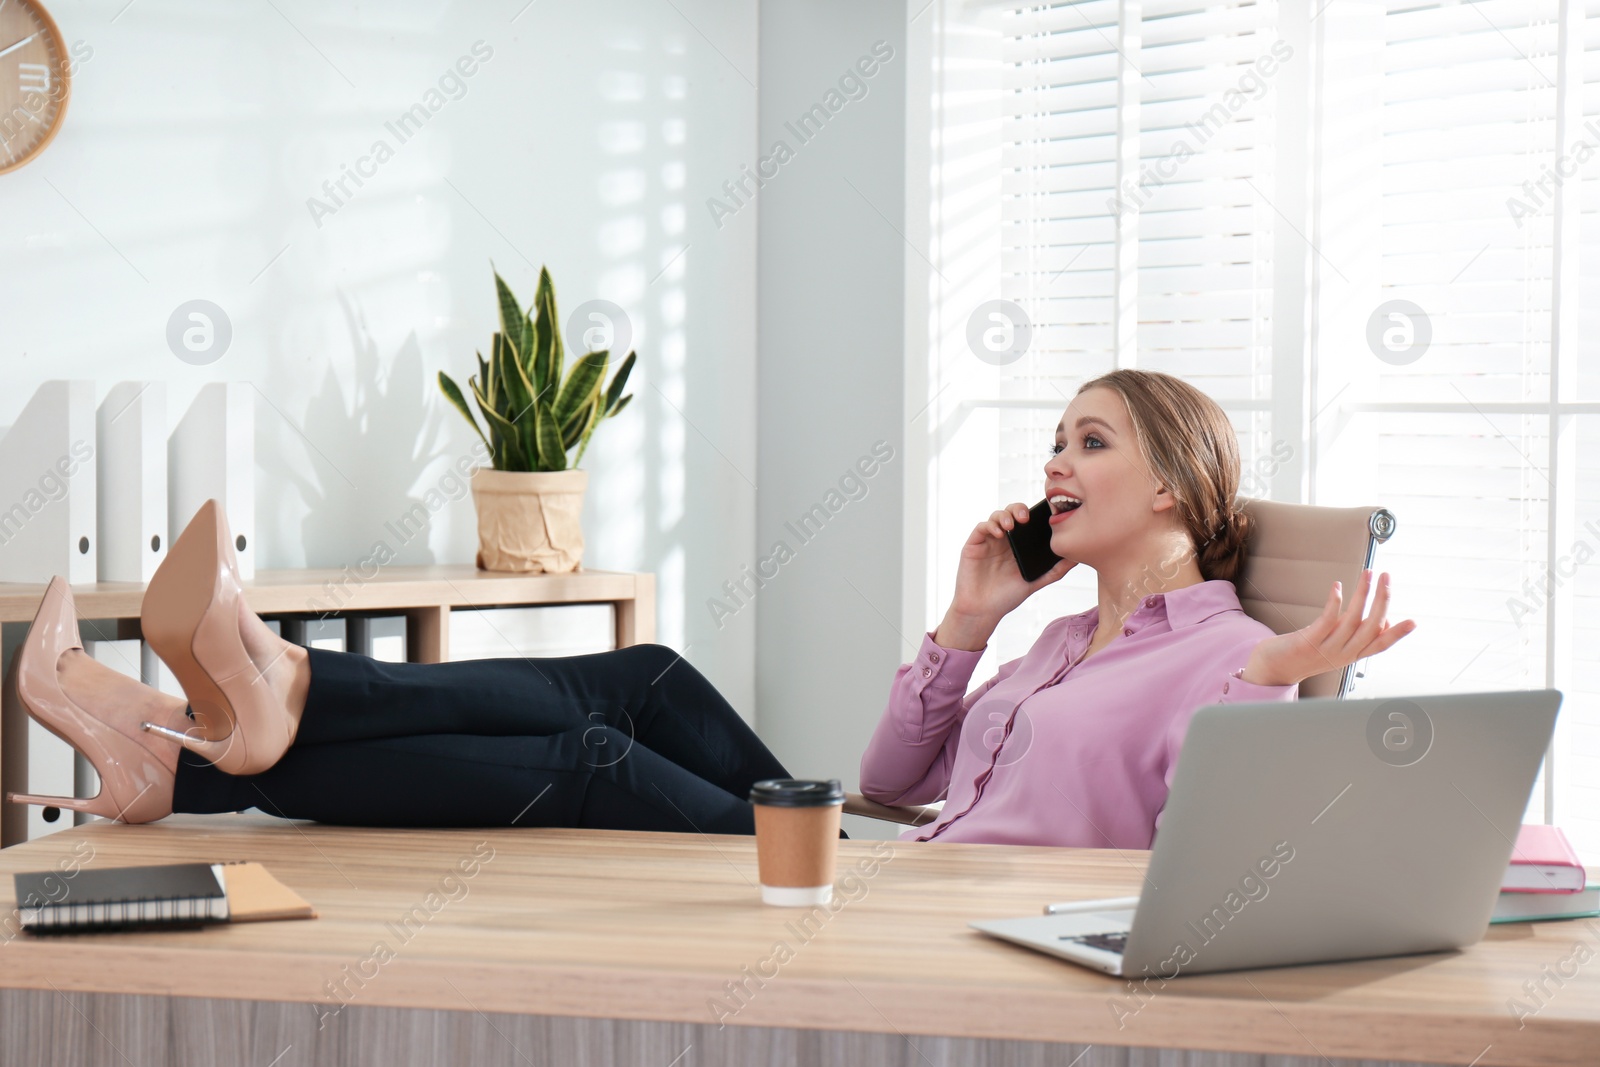 Photo of Lazy office worker talking on phone at desk indoors